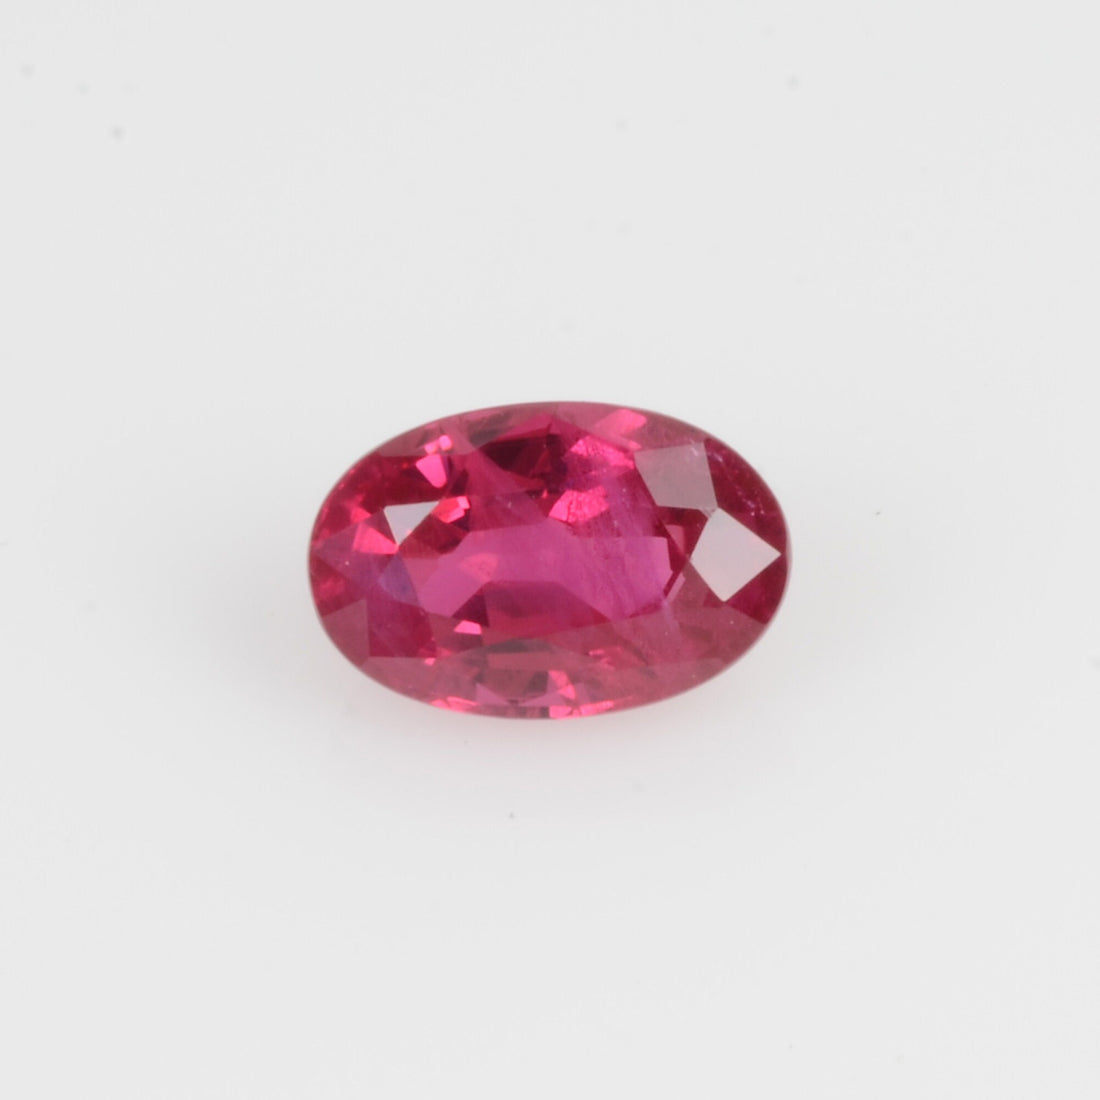 0.47 Cts Natural Ruby Loose Gemstone Oval Cut